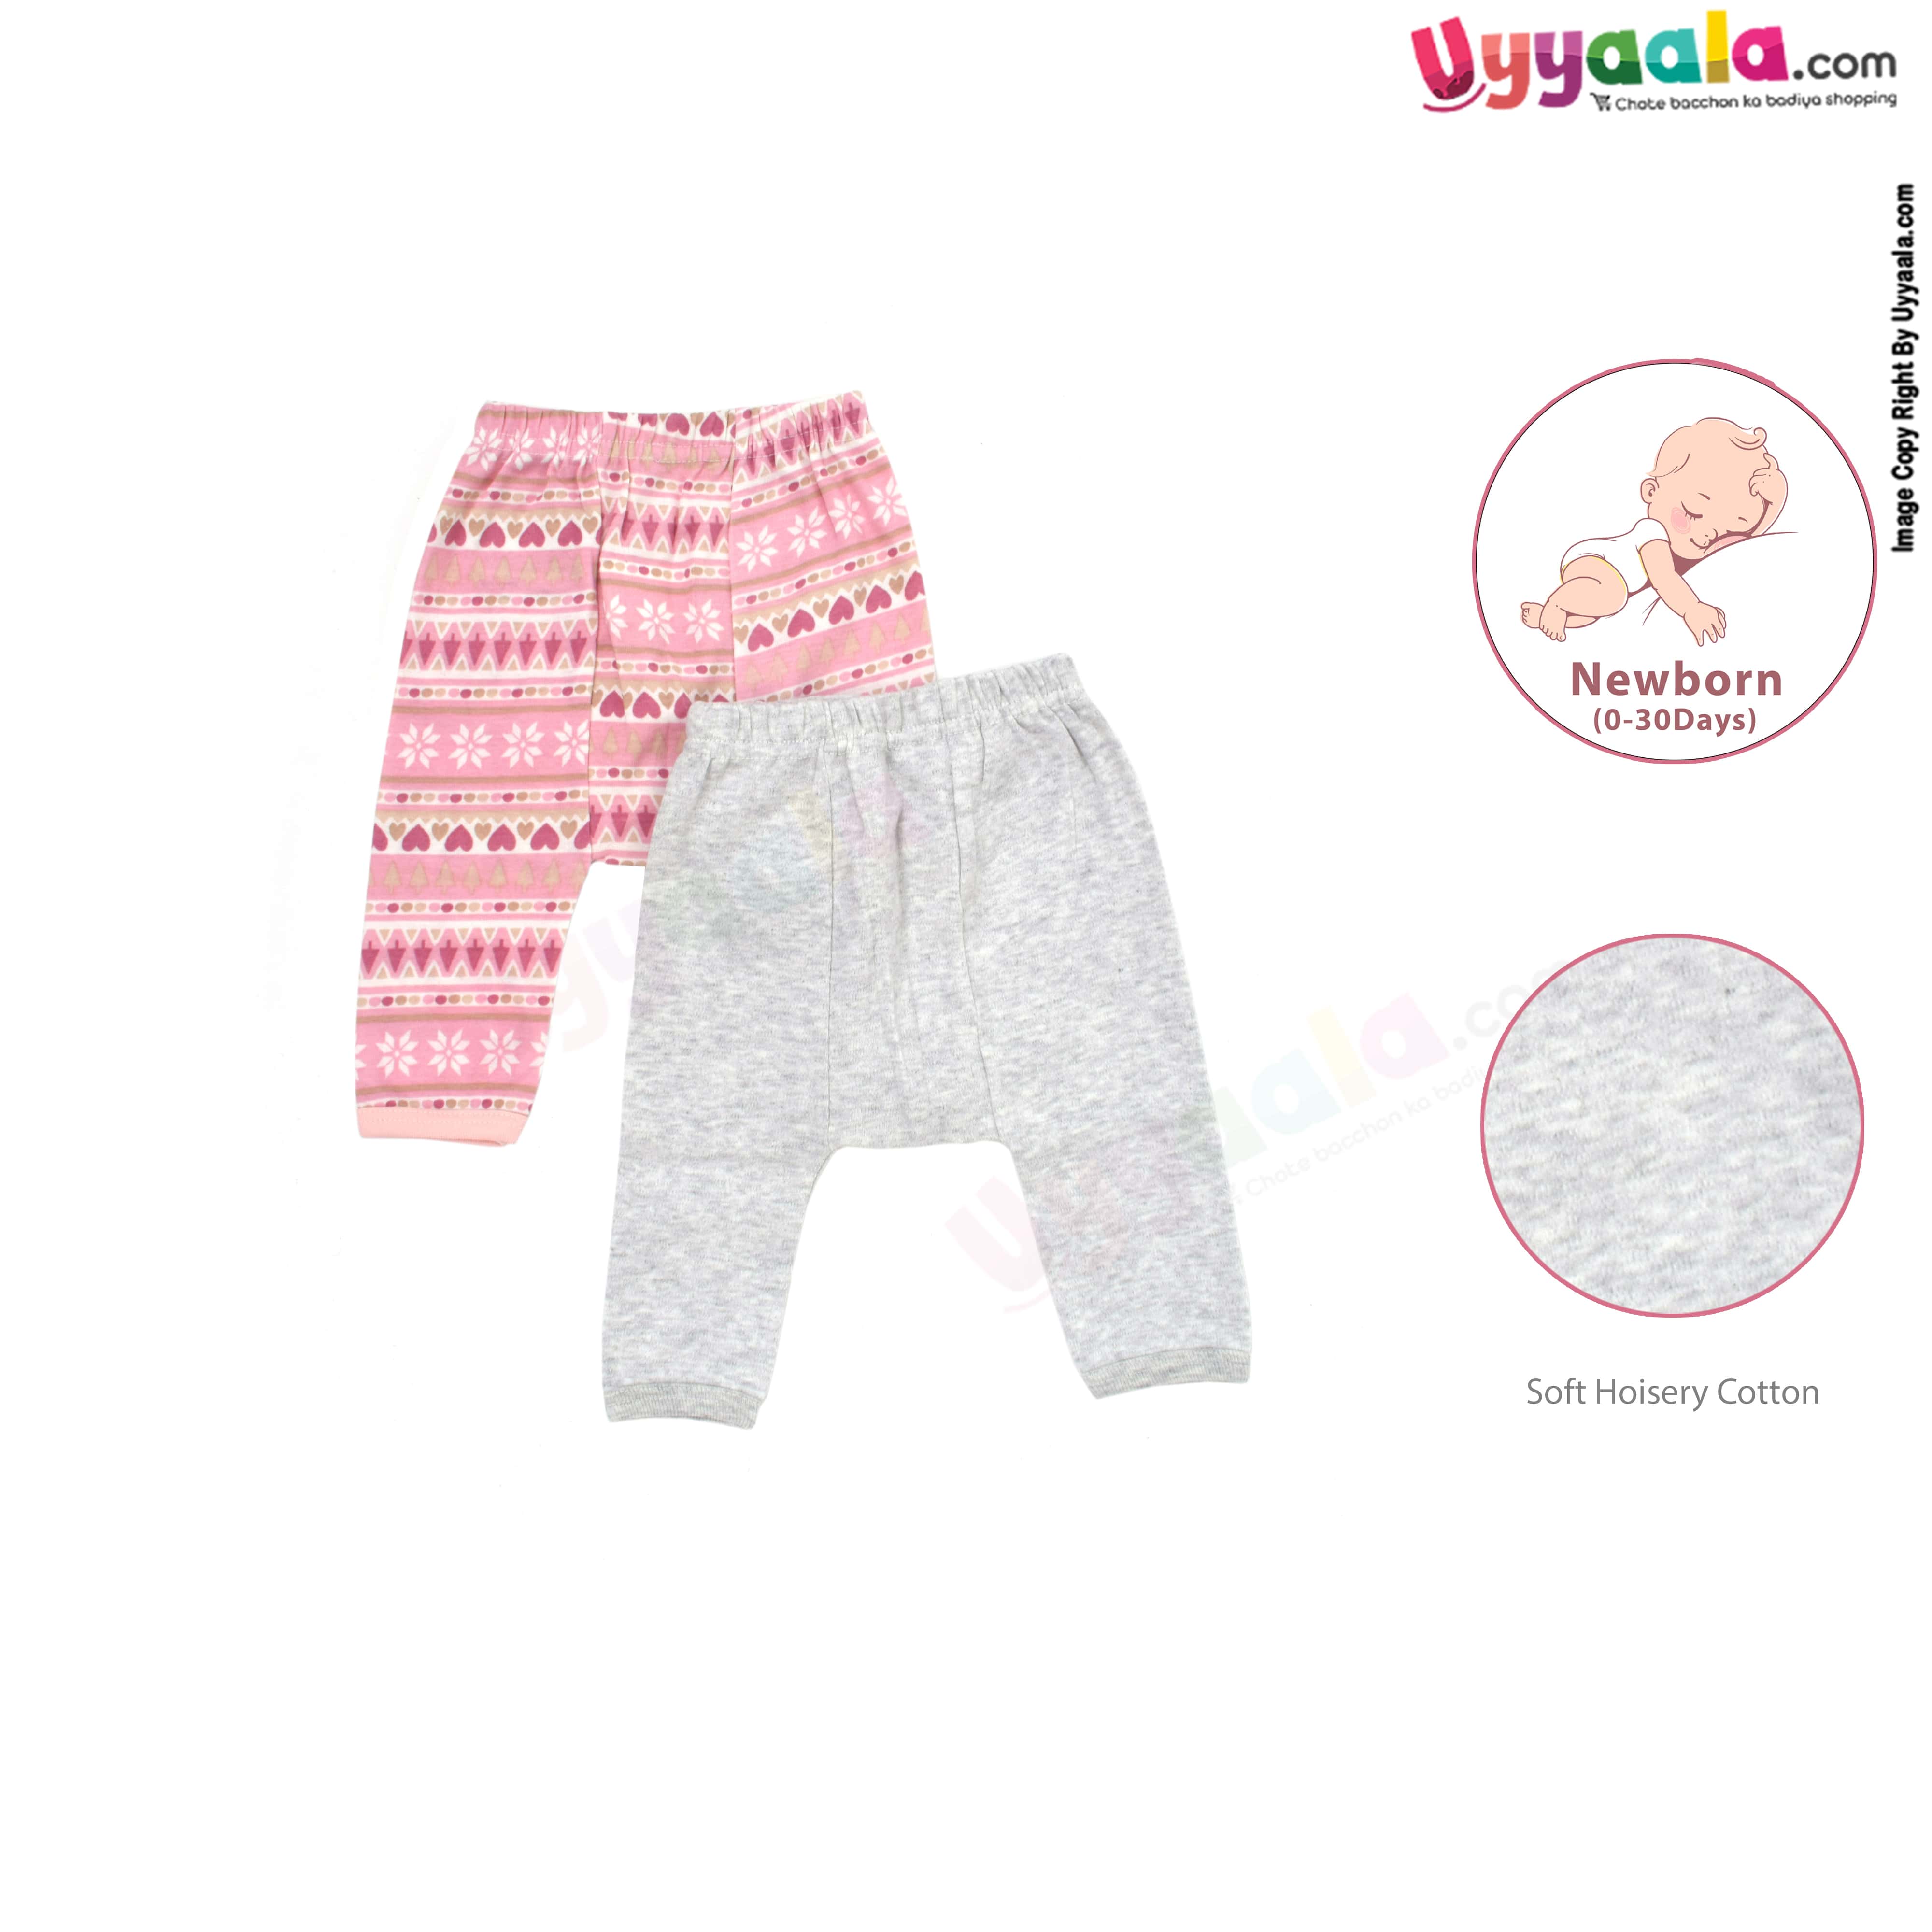 PRECIOUS ONE diaper pants 100% soft hosiery cotton pack of 2 - gray & pink with assorted prints (newborn)